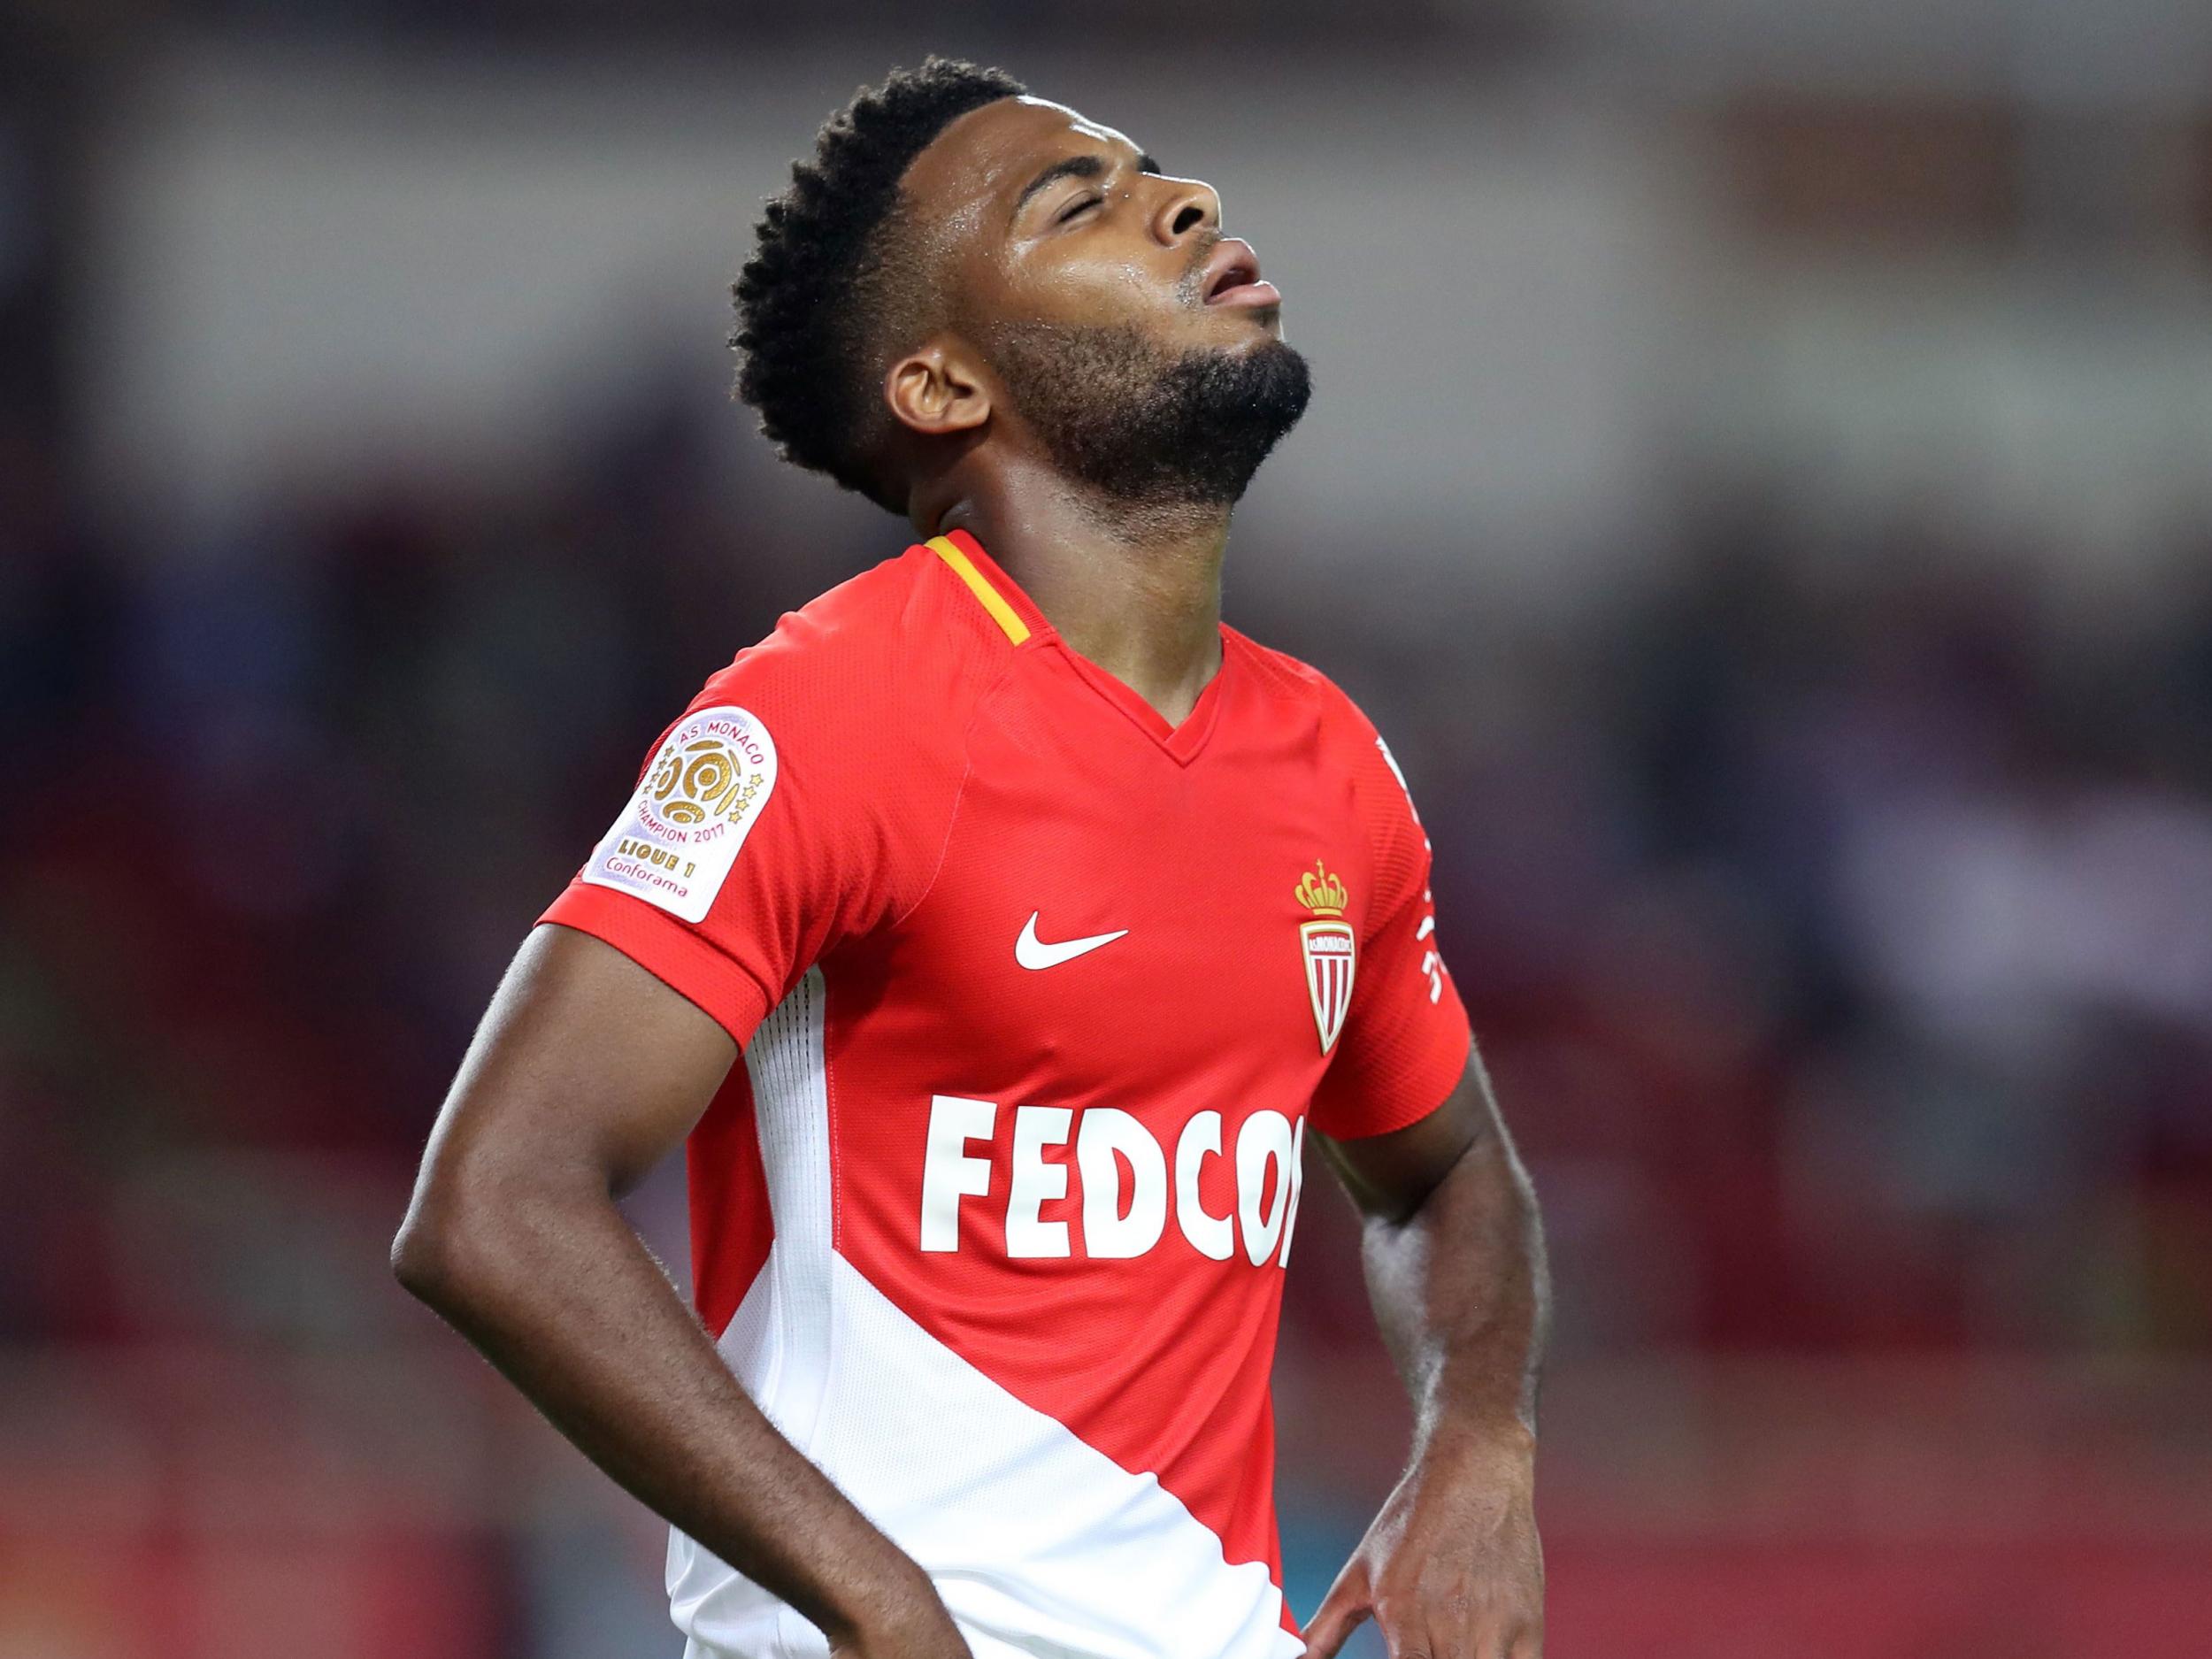 Monaco's Thomas Lemar has attracted interest from Arsenal and Liverpool